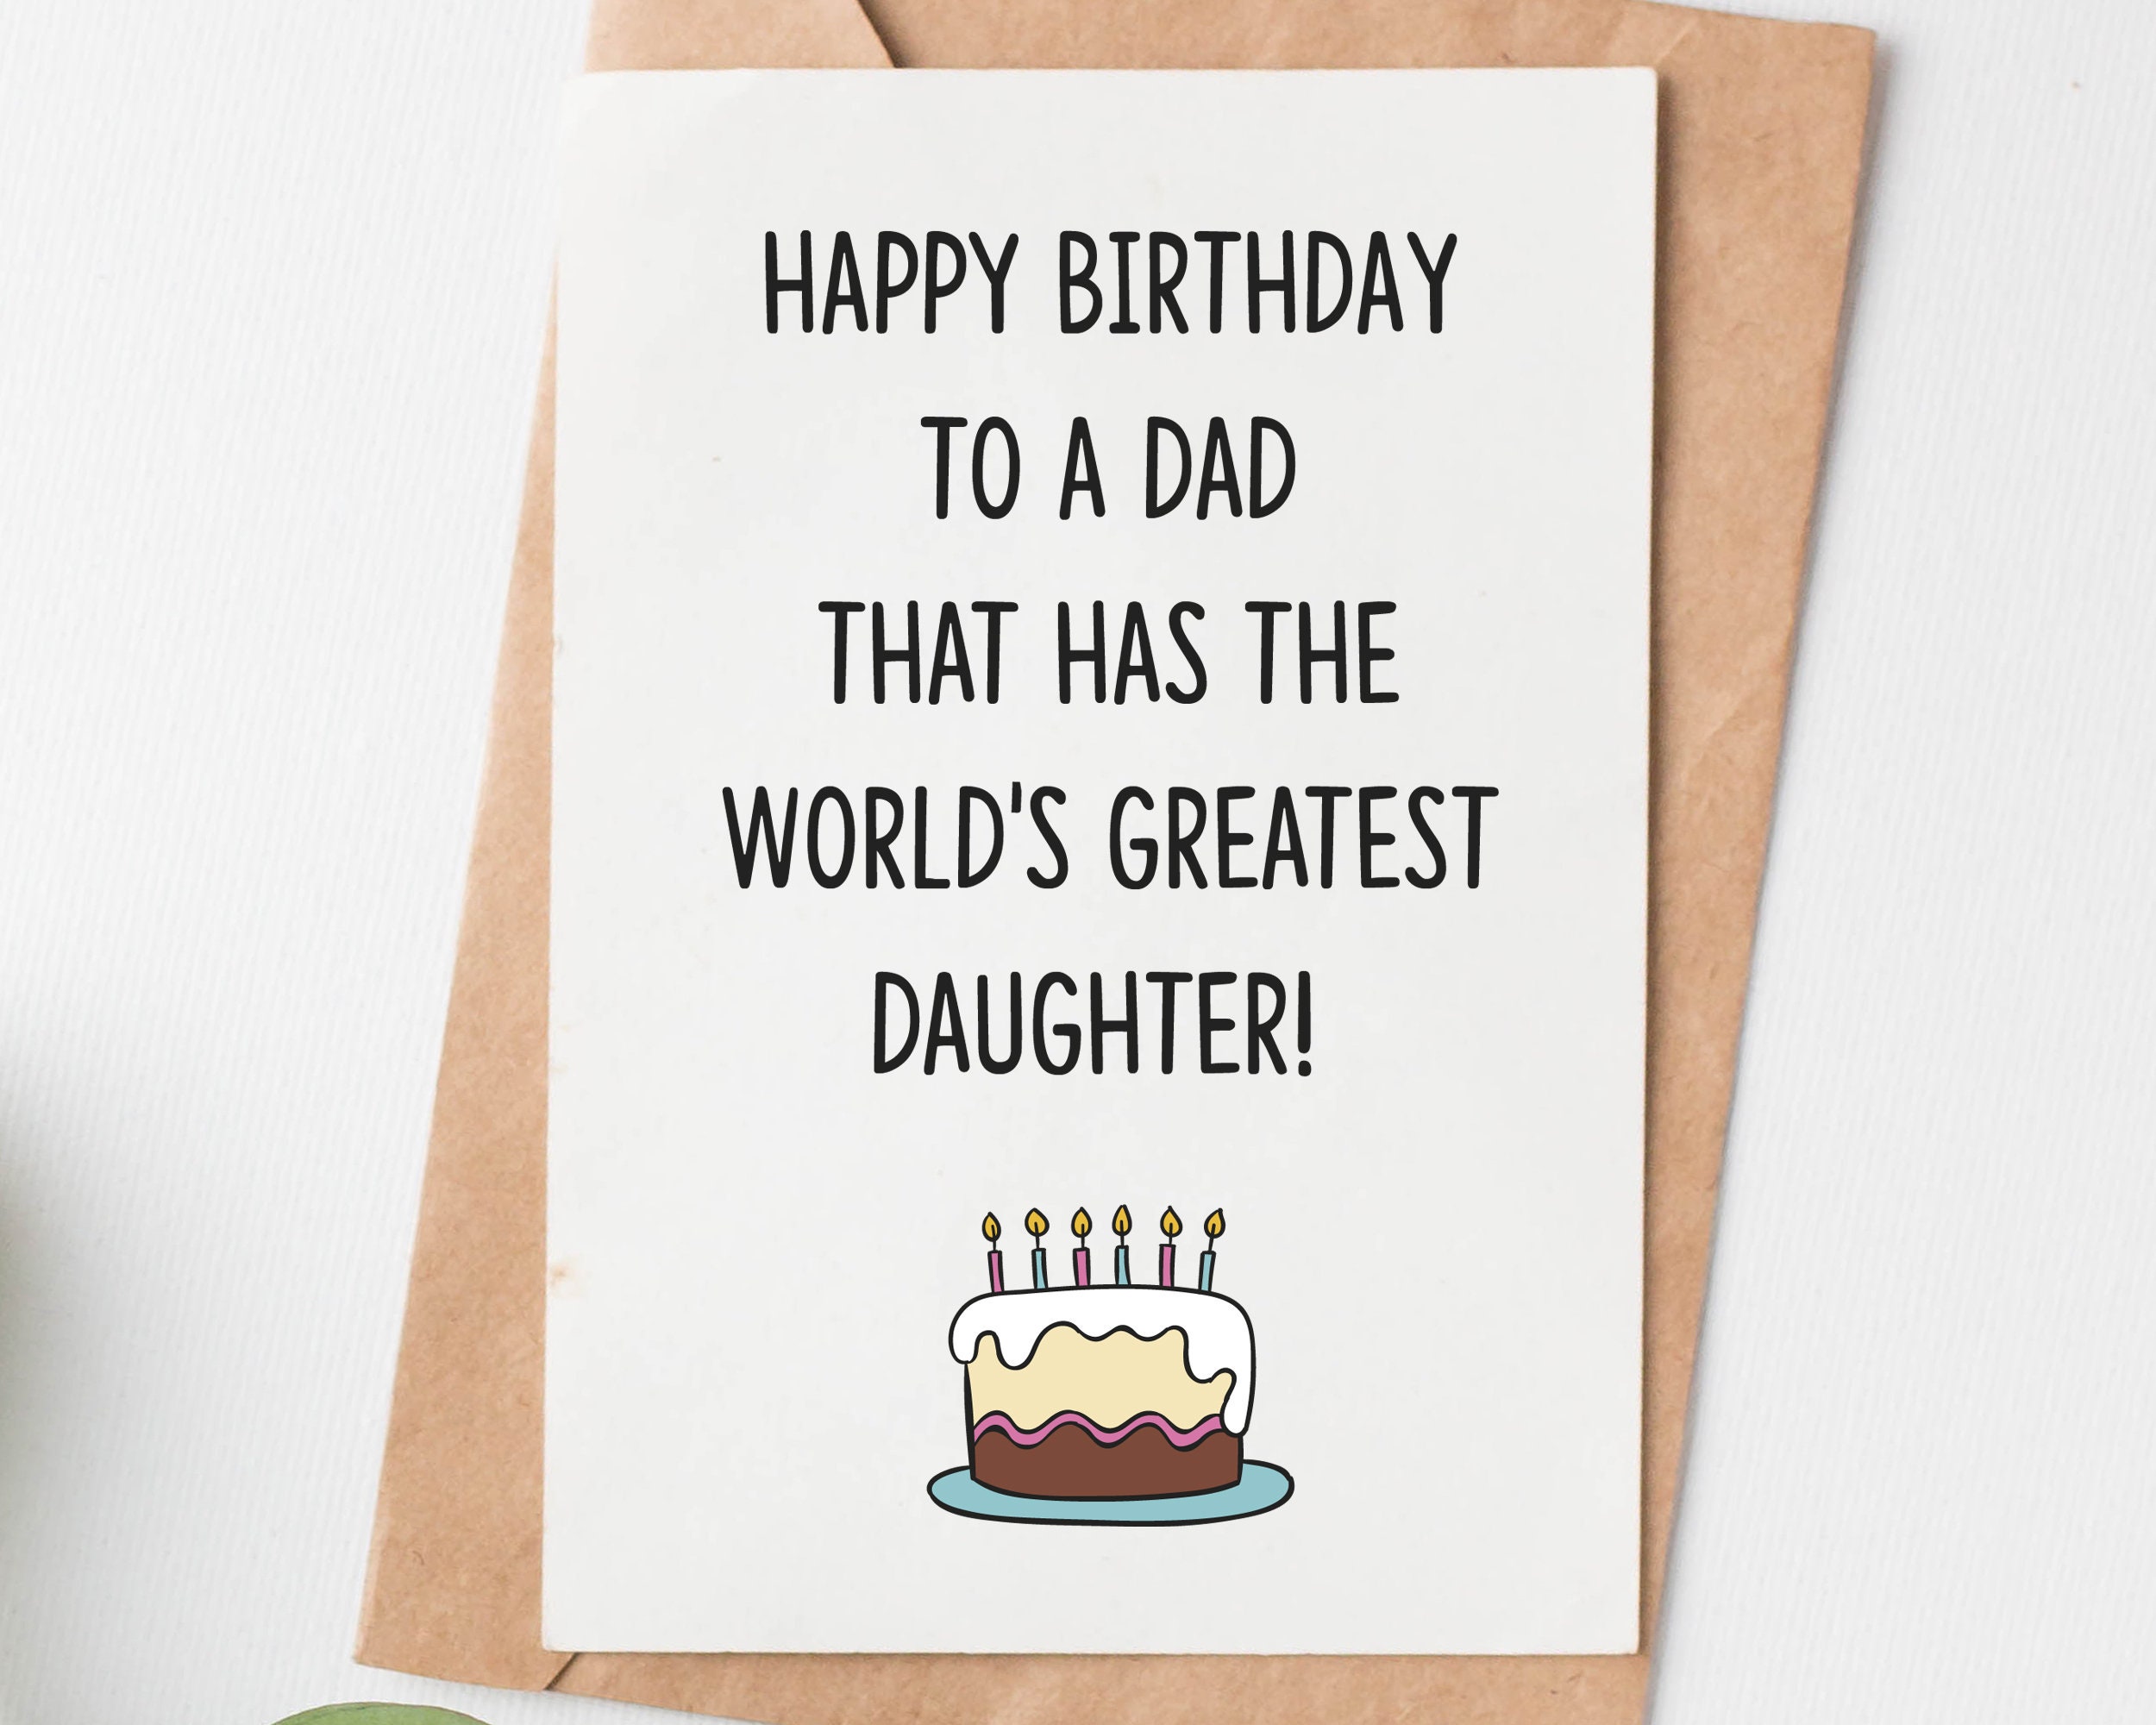 How To Make A Birthday Card For Dad Birthday Cards For Dad From Funny 